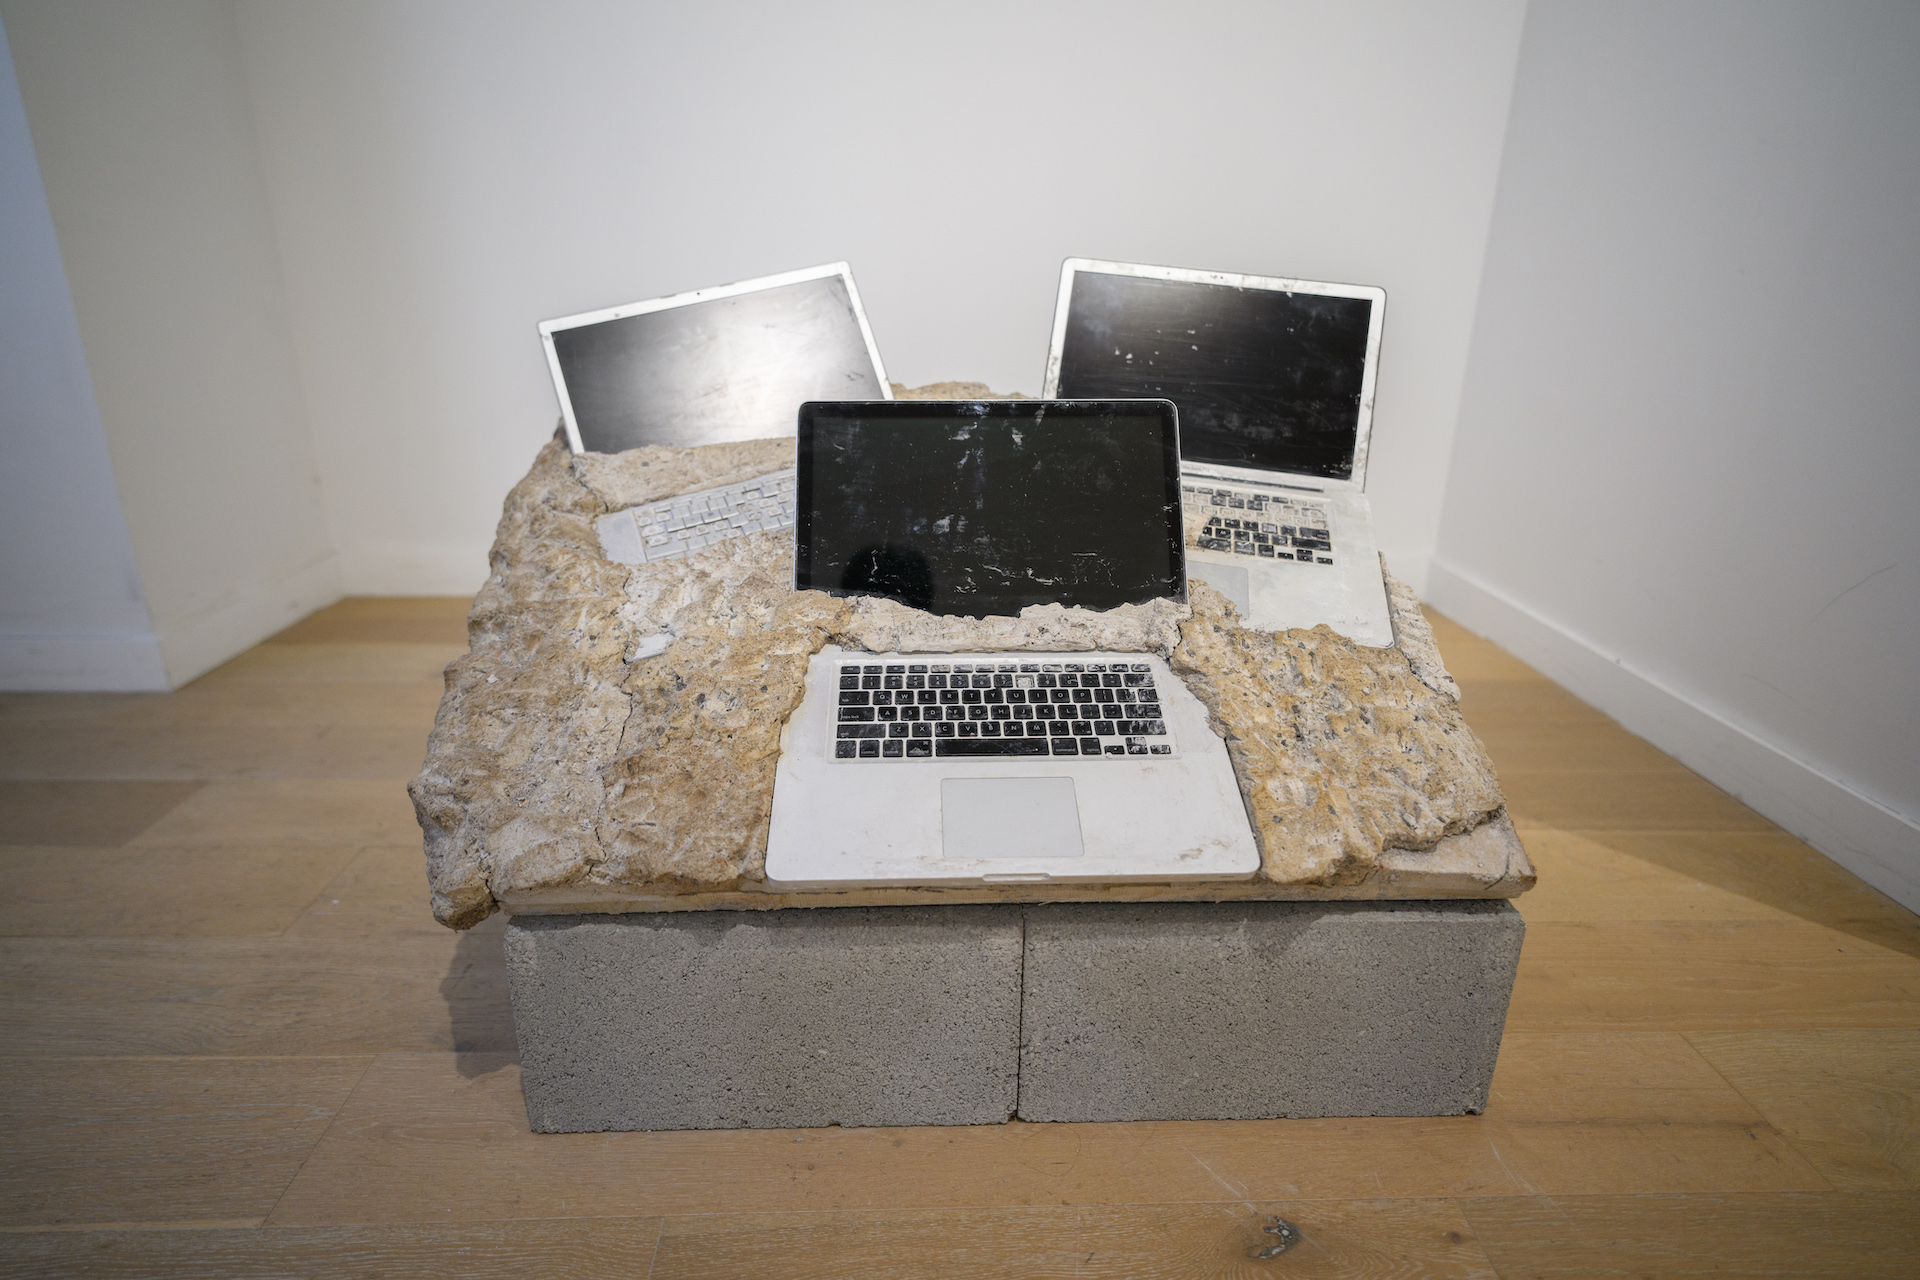 Laptops covered in concrete